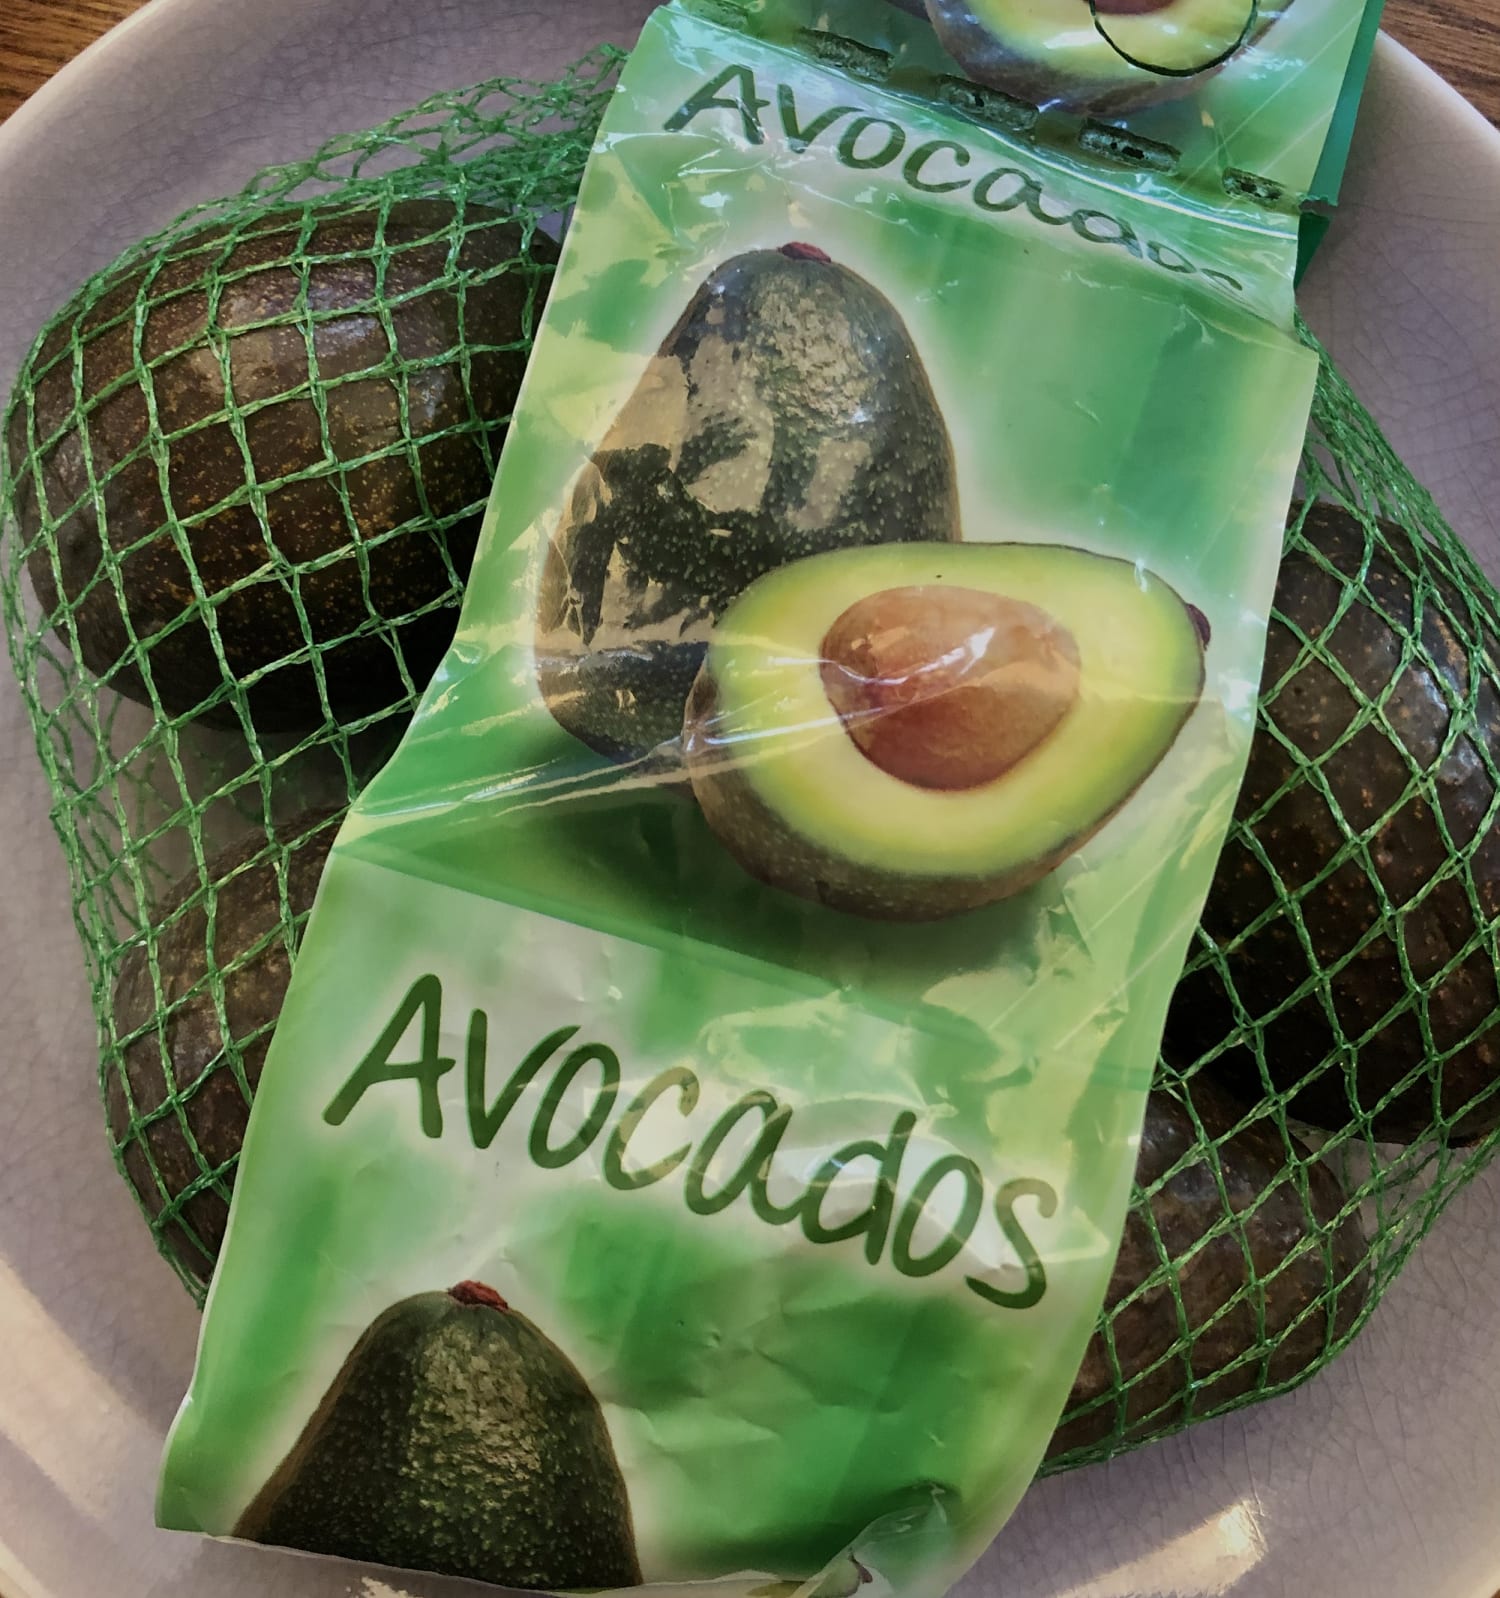 Avocado in Water Storage 'Hack' Isn't Safe. Here's What to Do Instead